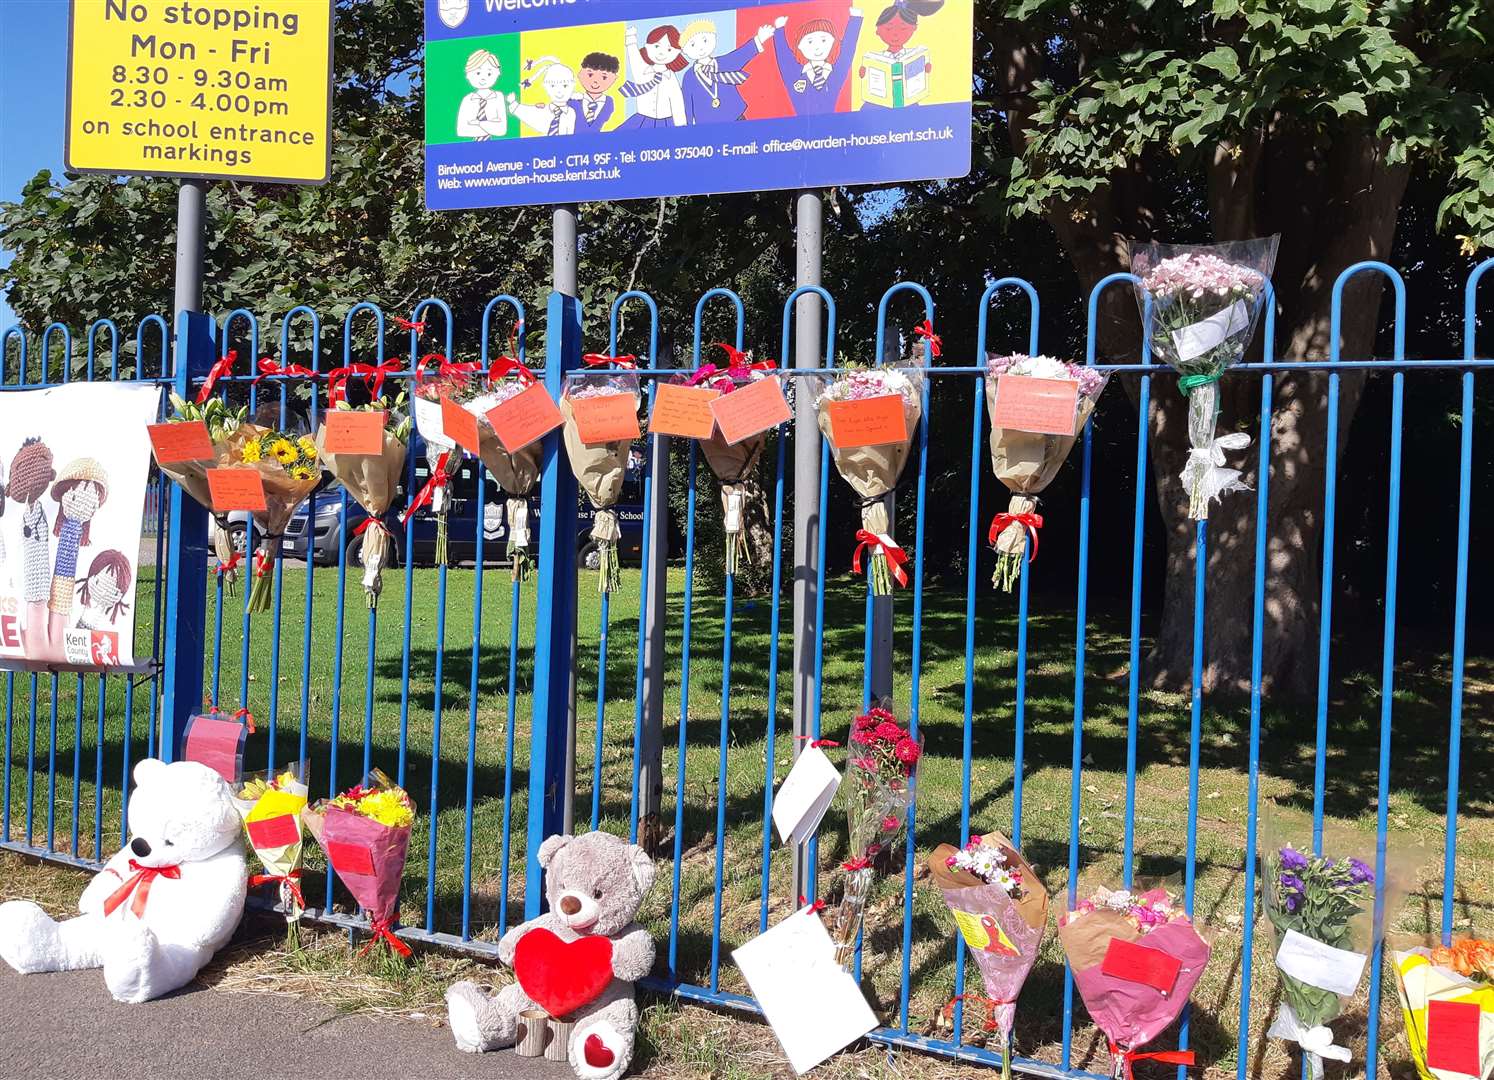 Teddies and flowers at the entrance to Lucas Dobson’s primary school in Deal